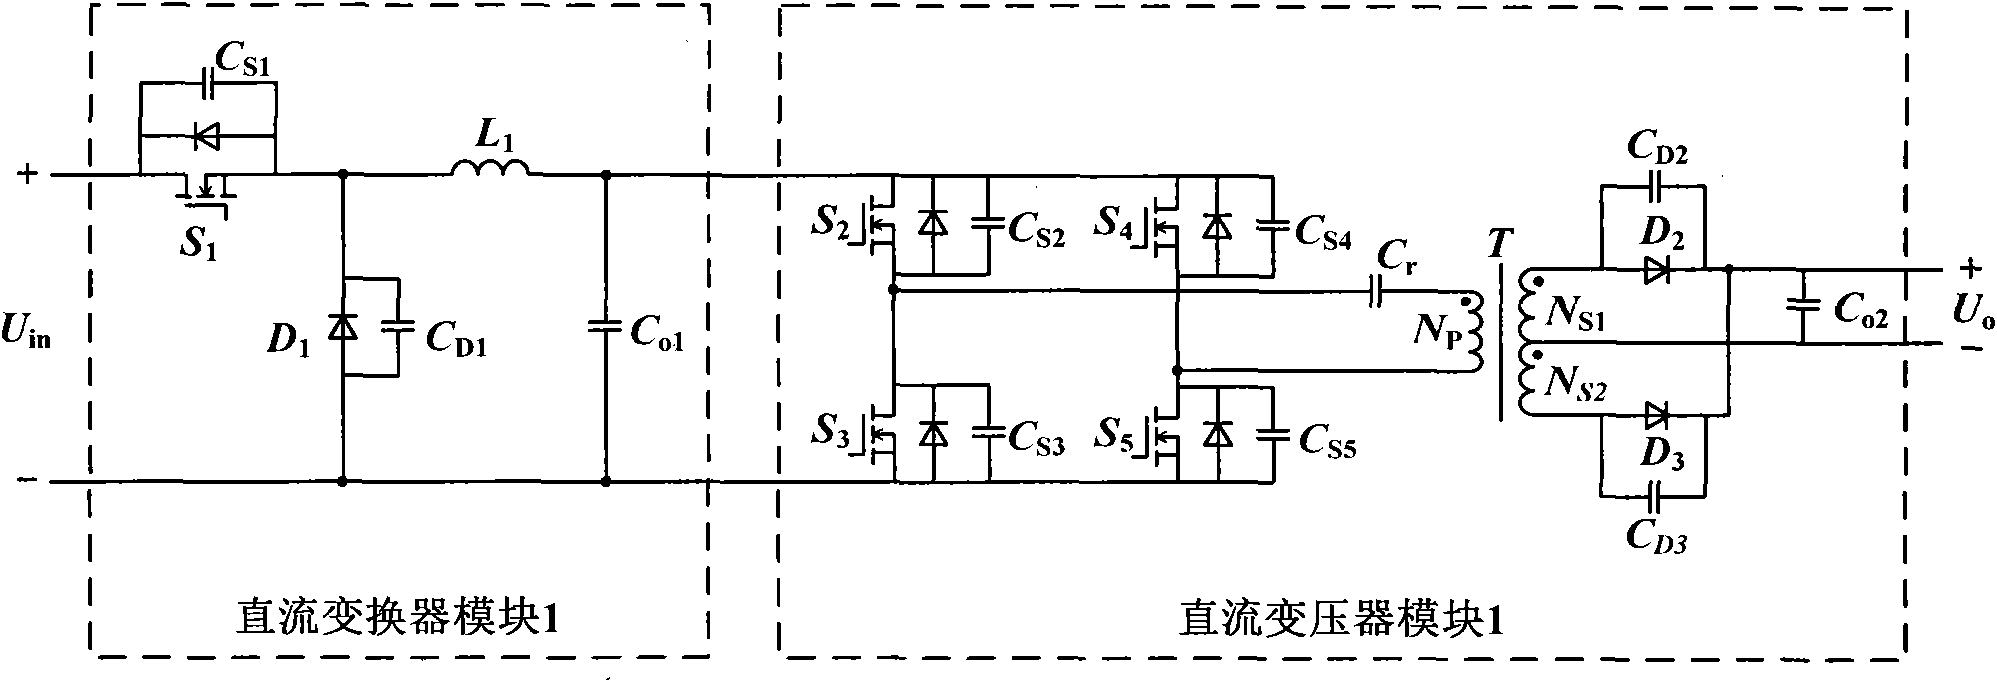 Two-stage type DC converter with high voltage input and low-voltage large current output